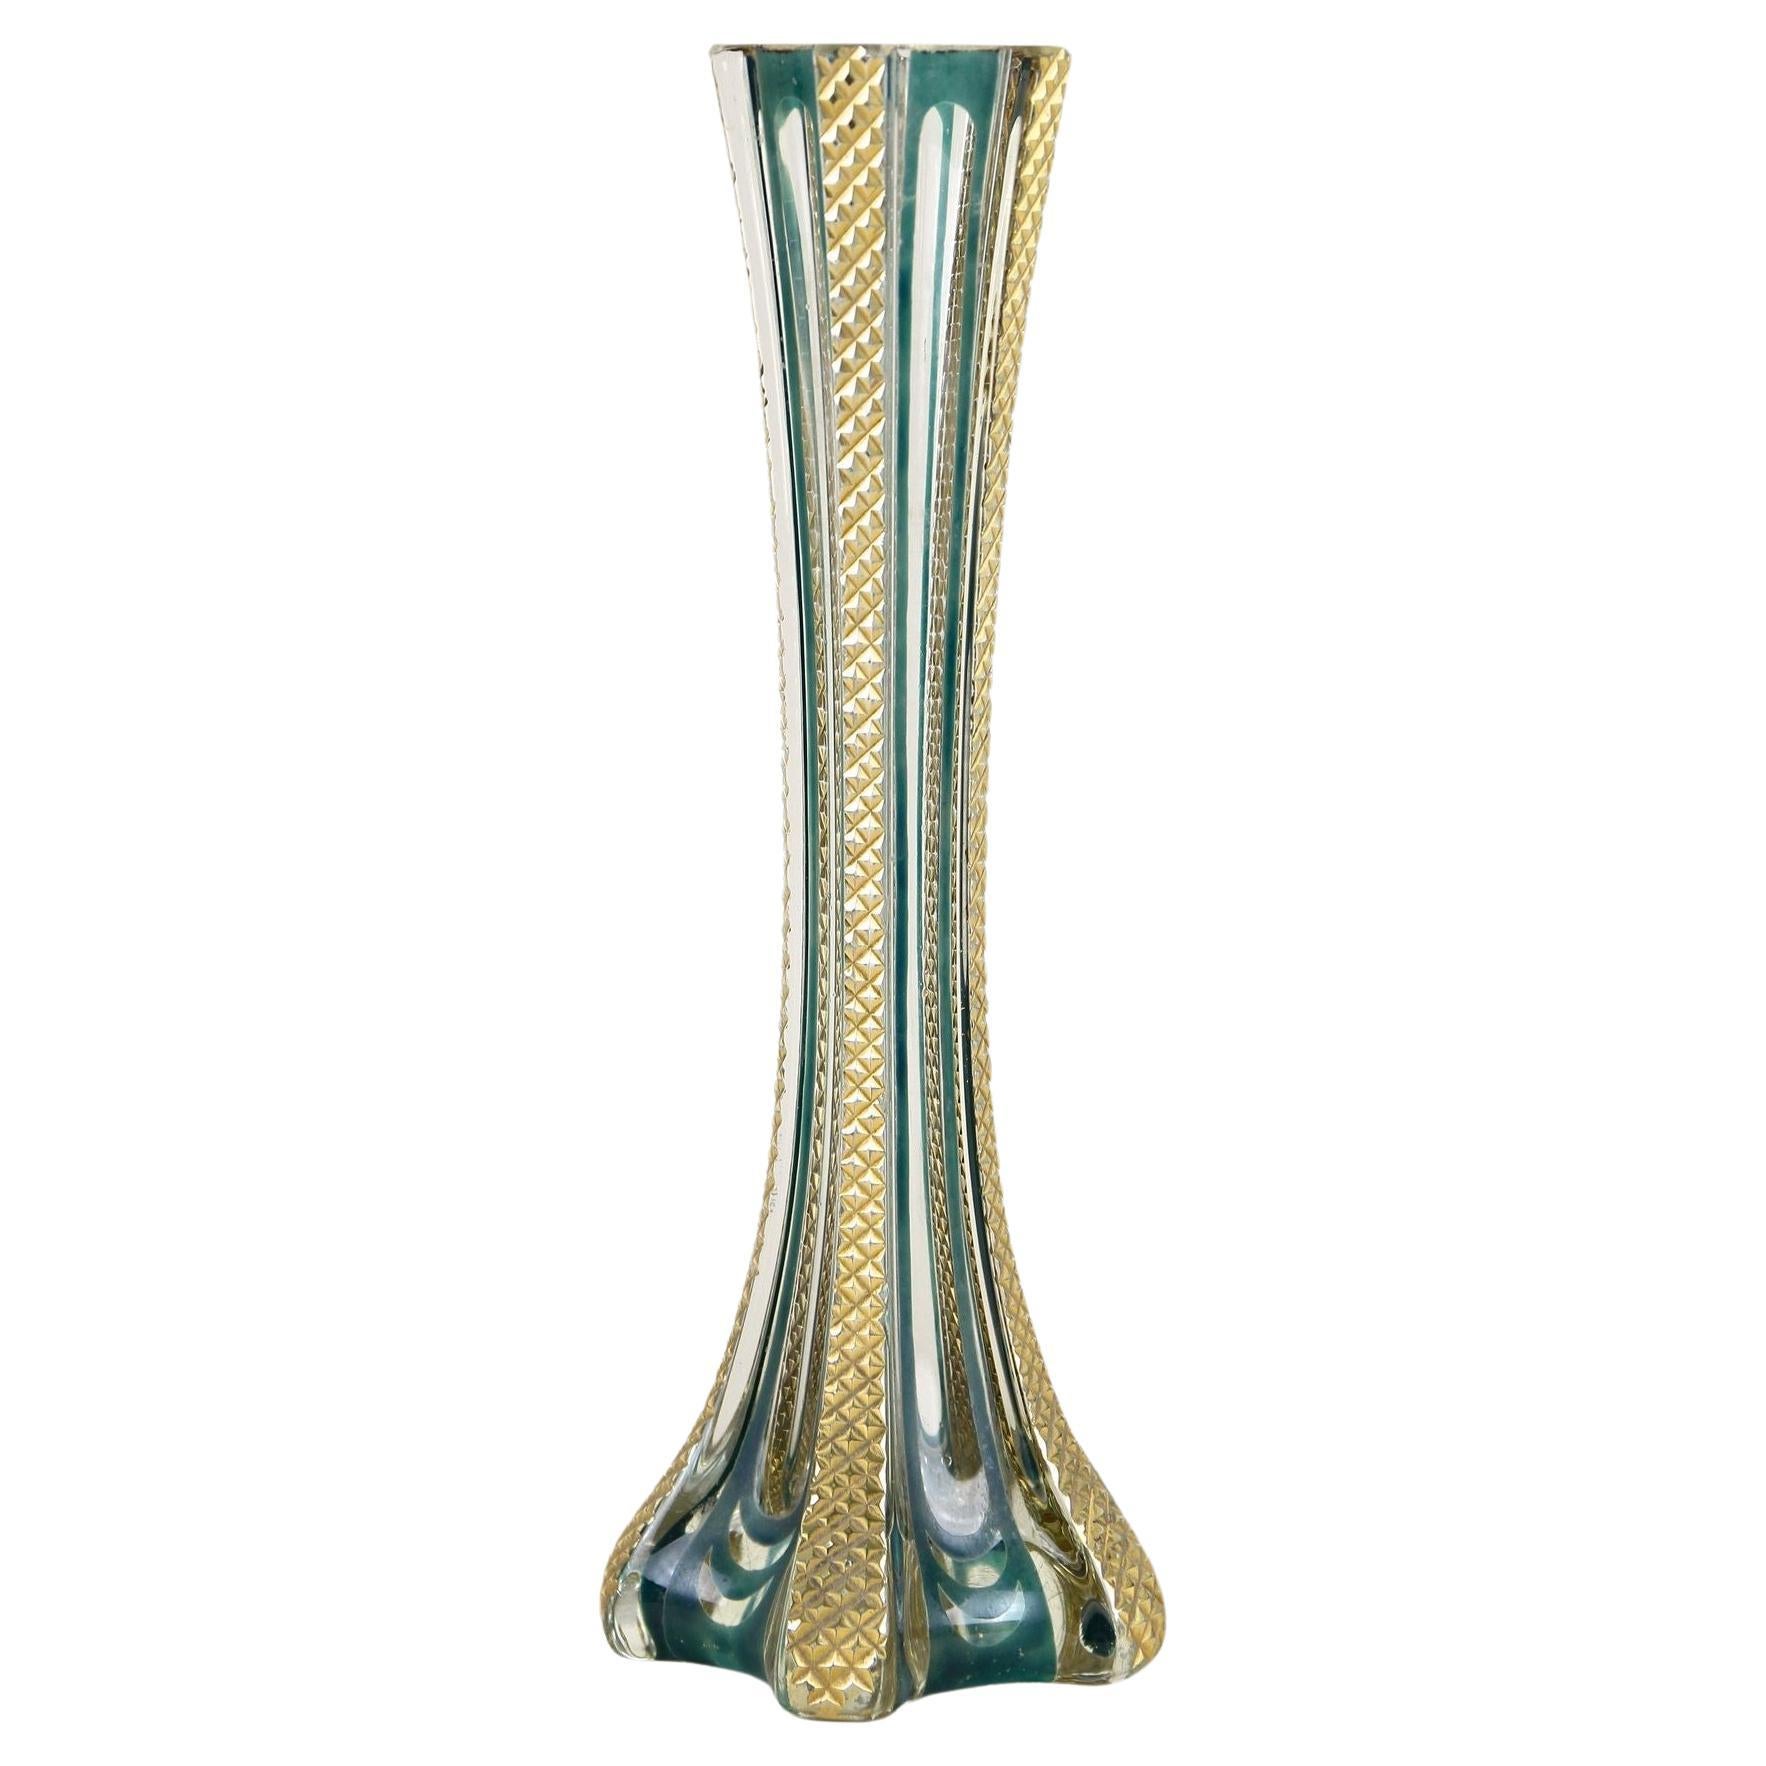 Murano Glass Vase With Gold Accents, Early 20th Century - Italy ca. 1930 For Sale